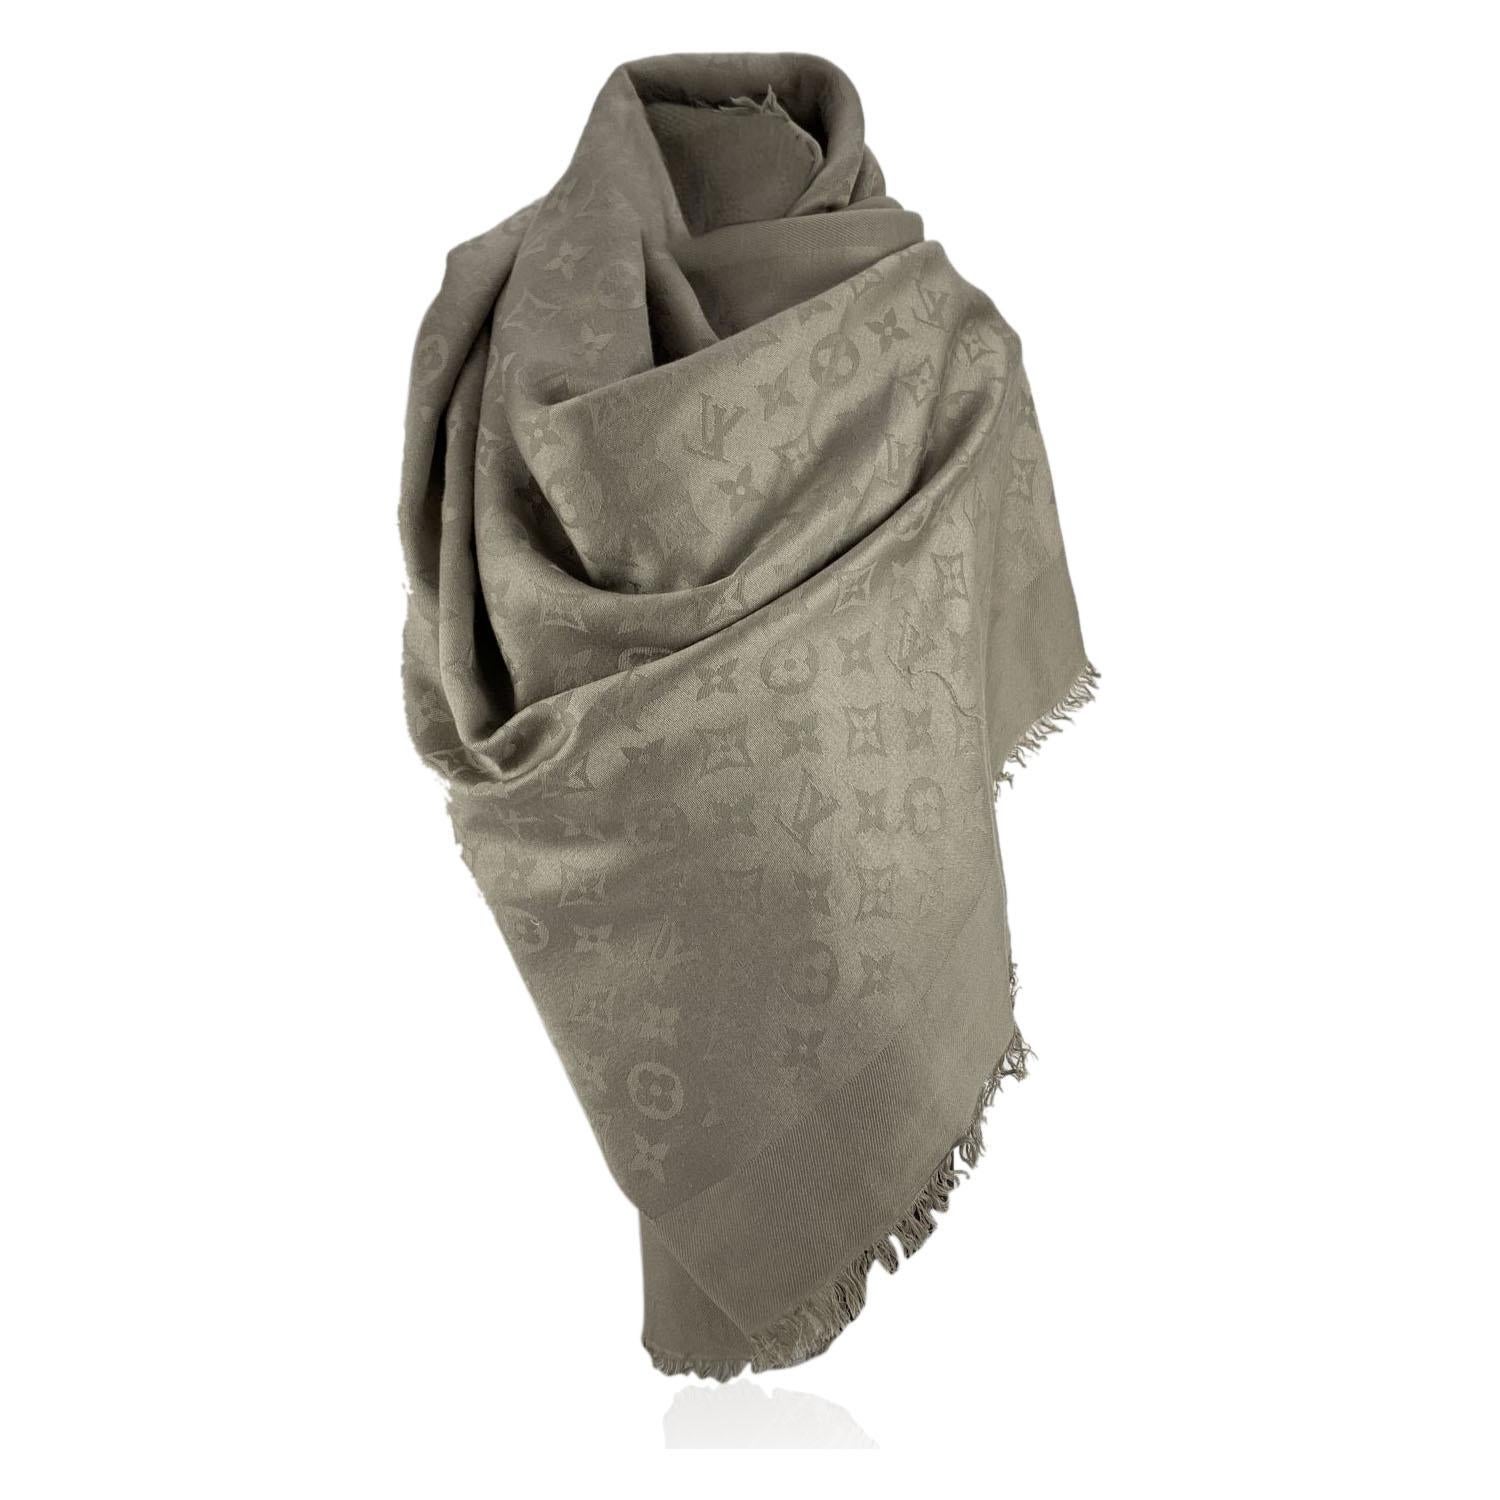 Louis Vuitton grey silk and wool large scarf with jacquard monogram pattern. Frayed edges.Composition: 60% silk, 40% wool. Measurements: 55 x 57 inches - 139.7 x 144.8 cm . Made in Italy

Details

MATERIAL: Silk

COLOR: Grey

MODEL: Monogram